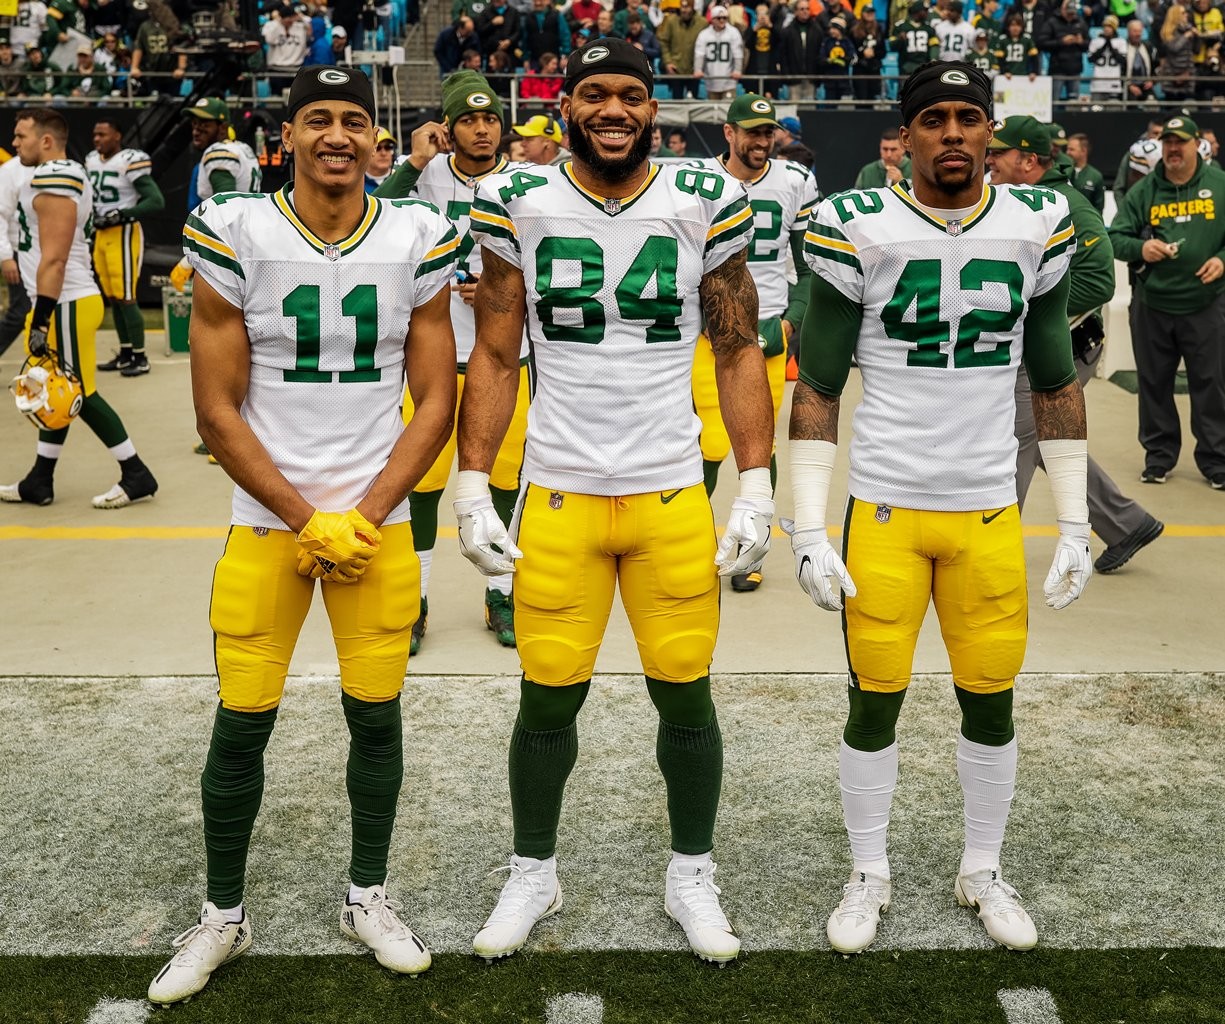 Packers captains announced for Vikings game